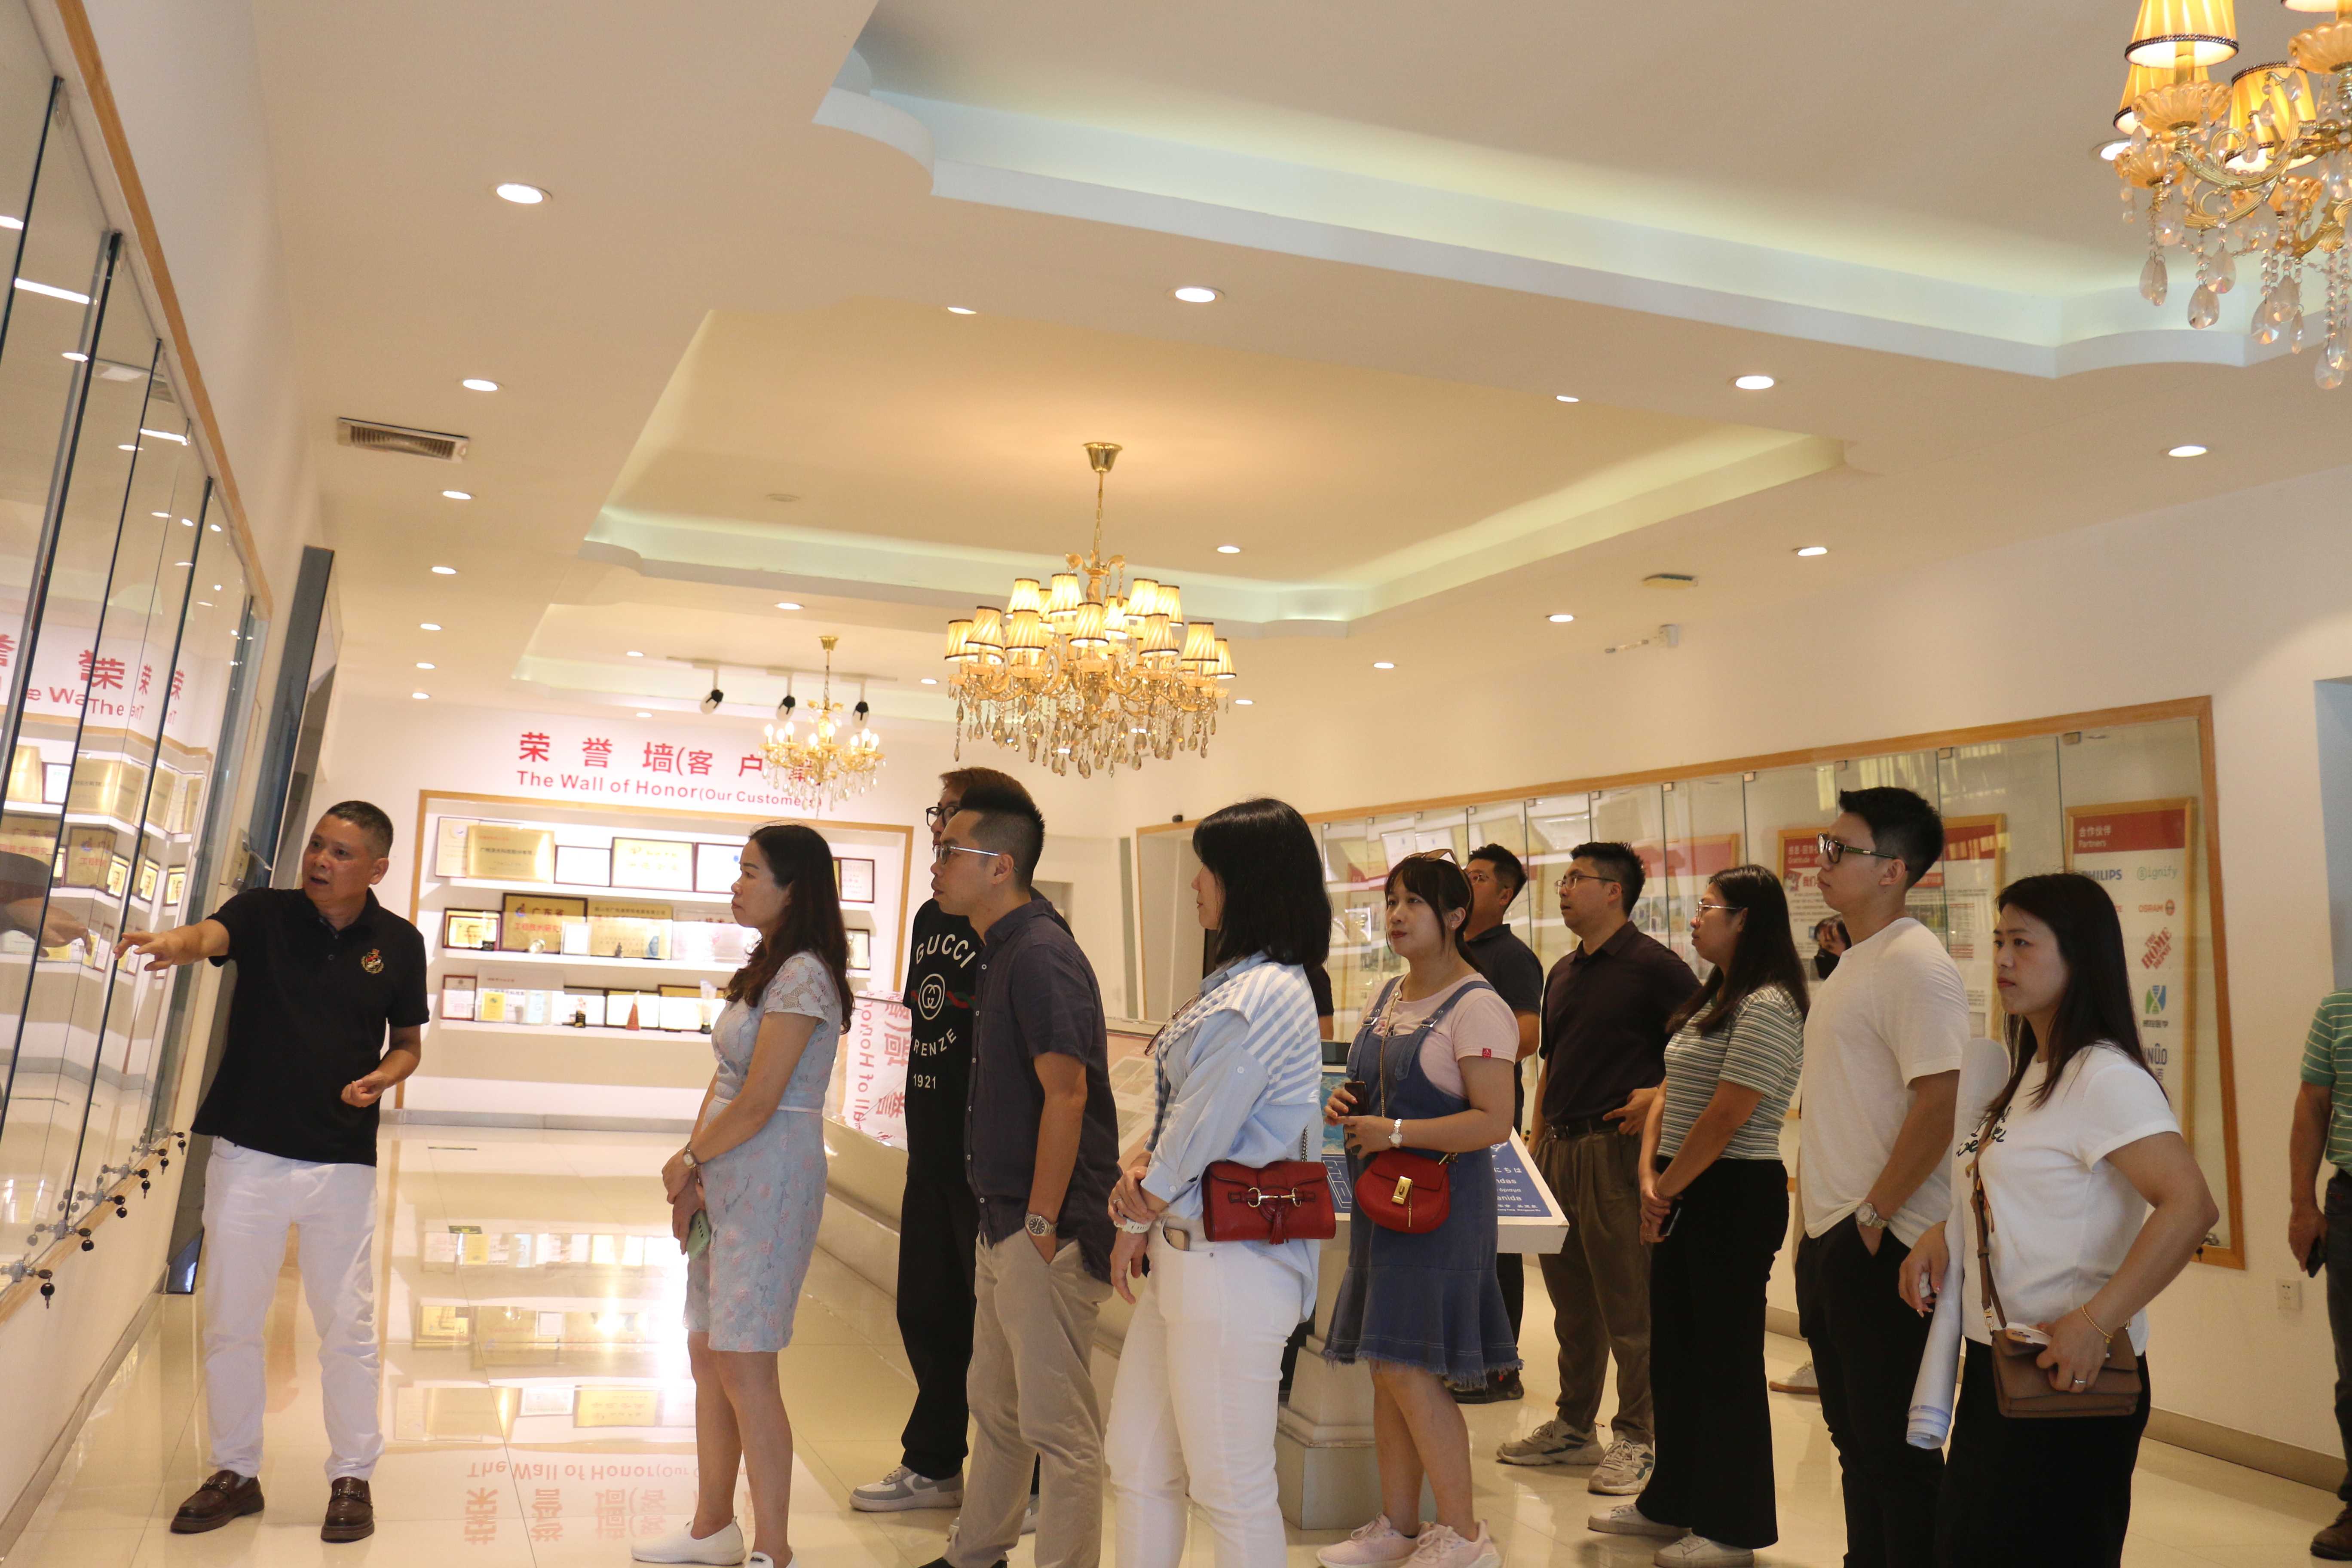 Vice President Yang Huazhang led the study team of the City International Students Association to visit the exhibition hall of Guangmingyuan Company